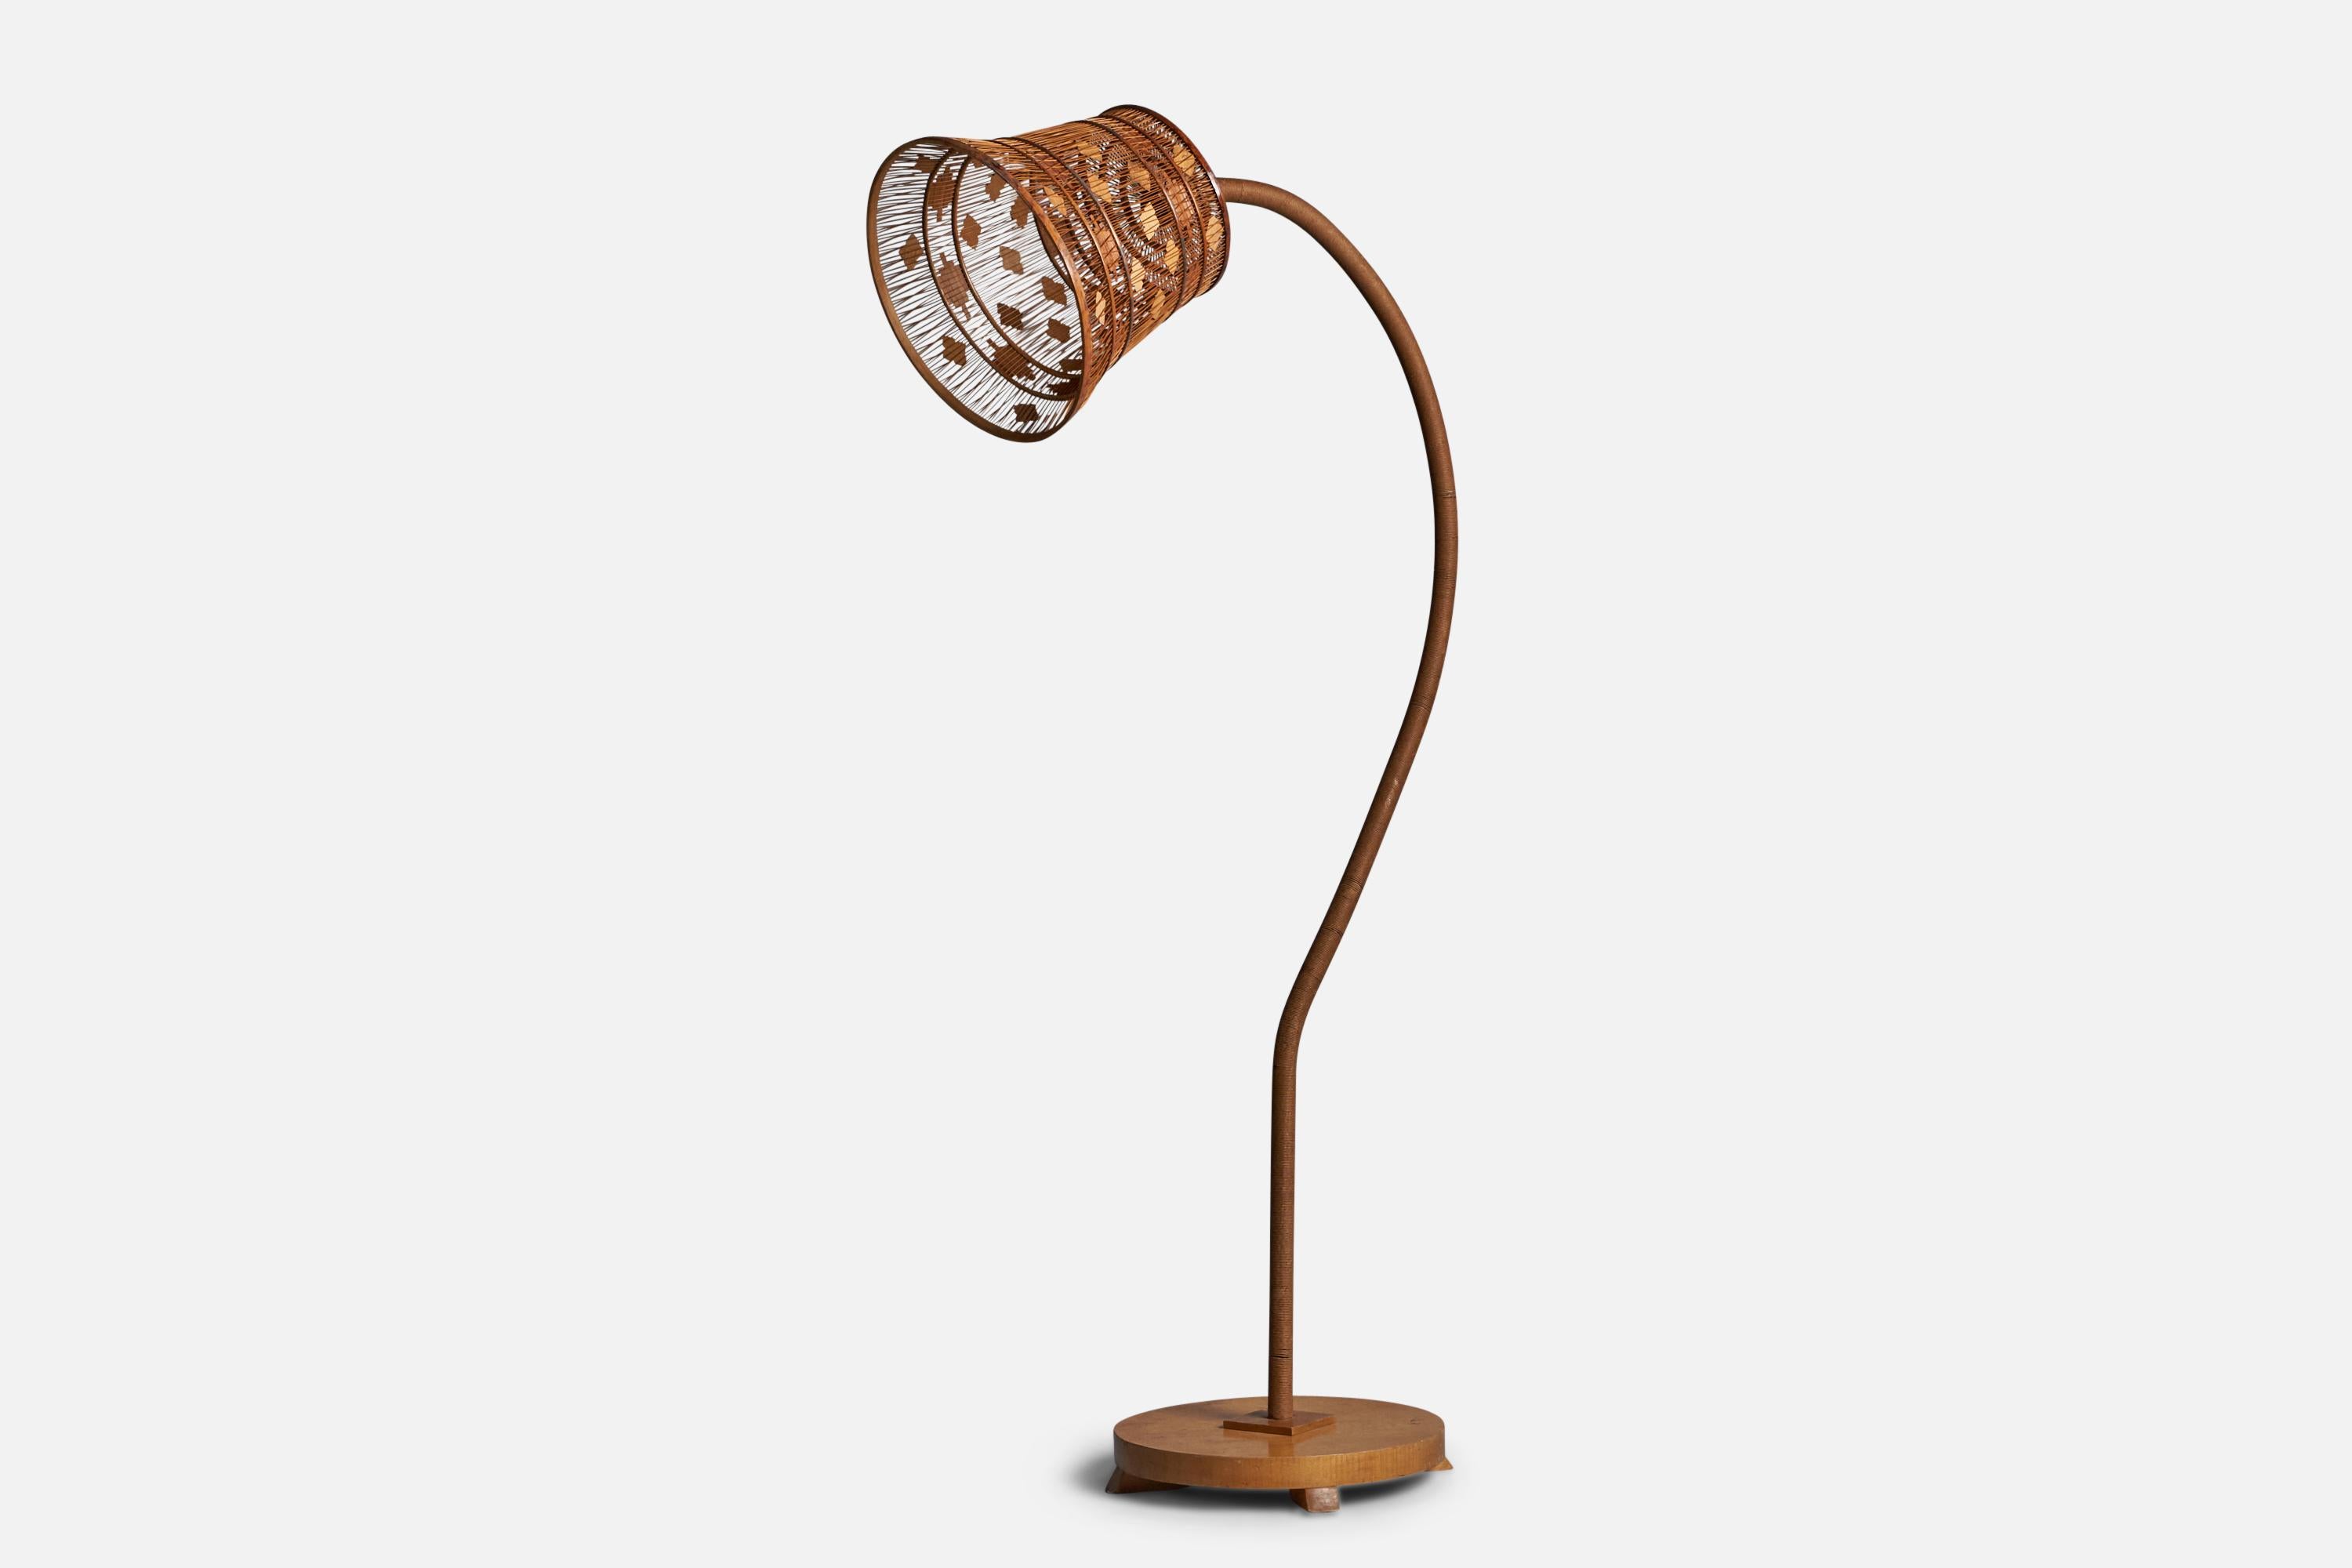 An adjustable cord, elm and wood floor lamp, designed and produced in Sweden, 1930s.

Overall Dimensions (inches): 65” H x 15.25” W x 30” D
Bulb Specifications: E-26 Bulb
Number of Sockets: 1
Condition: Assorted vintage lampshade, socket replaced. 